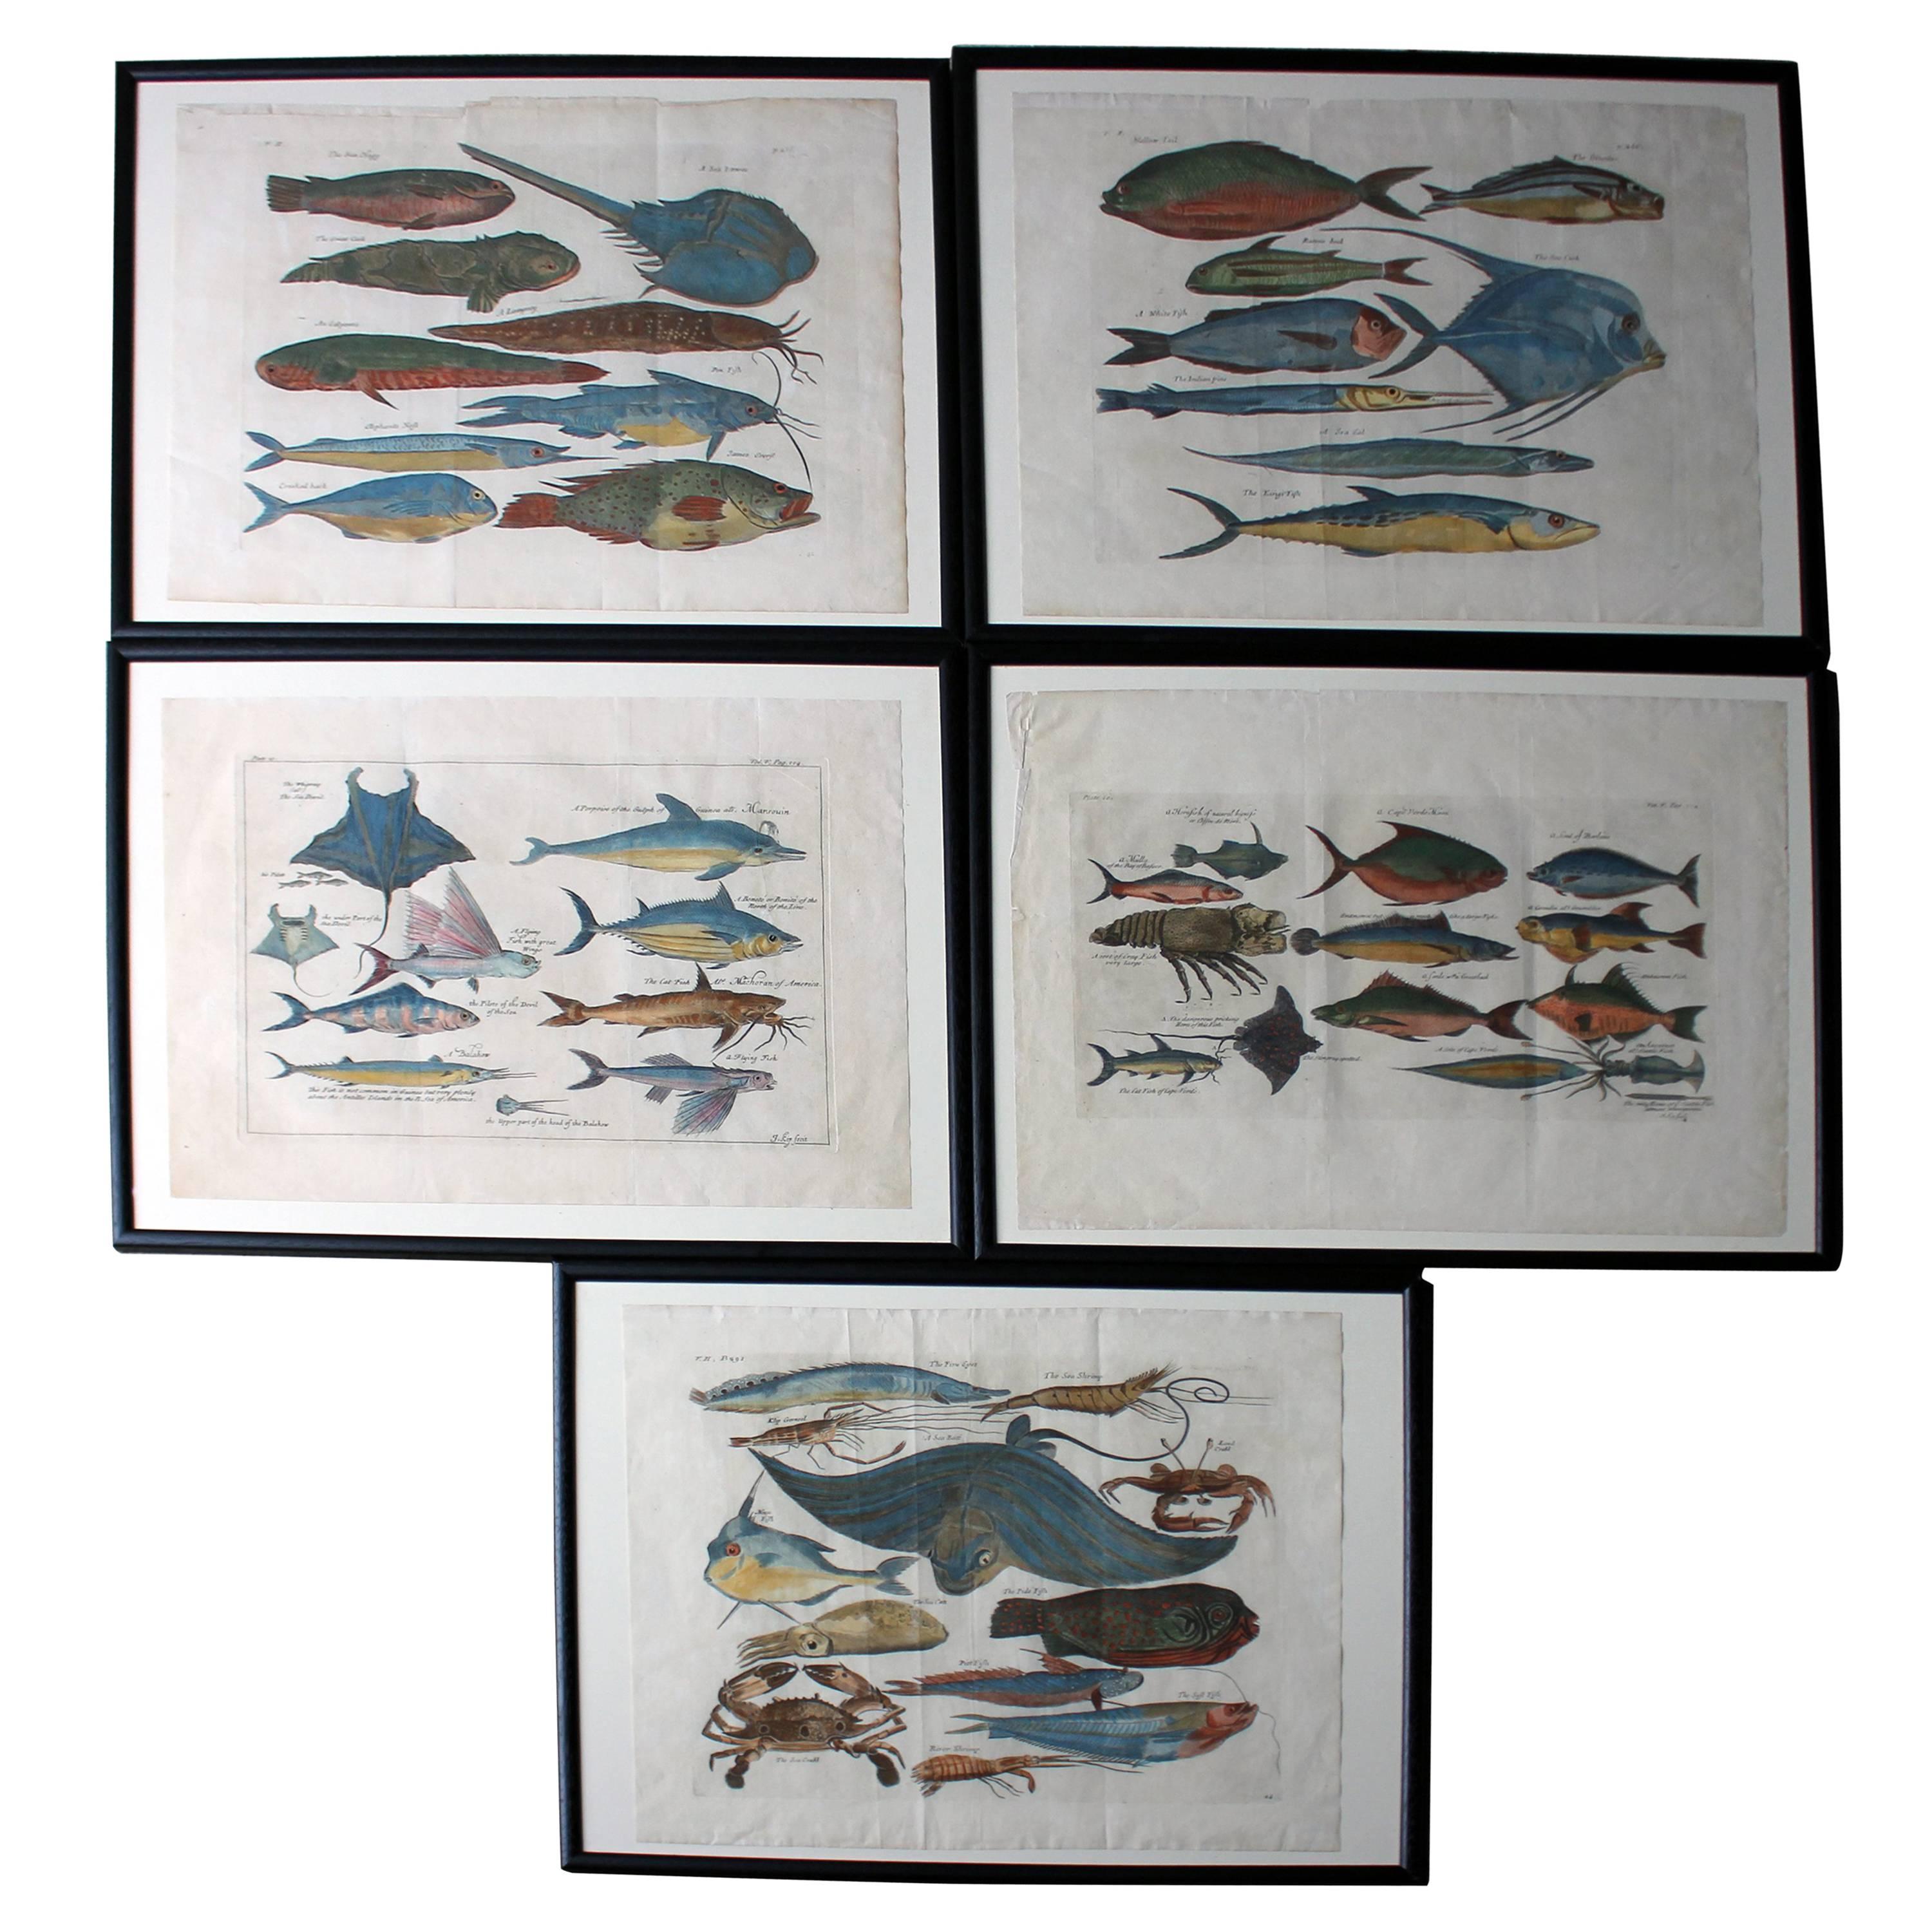 Hand-Colored Copper Plates of Fish from “a Collection of Voyages and Travels"